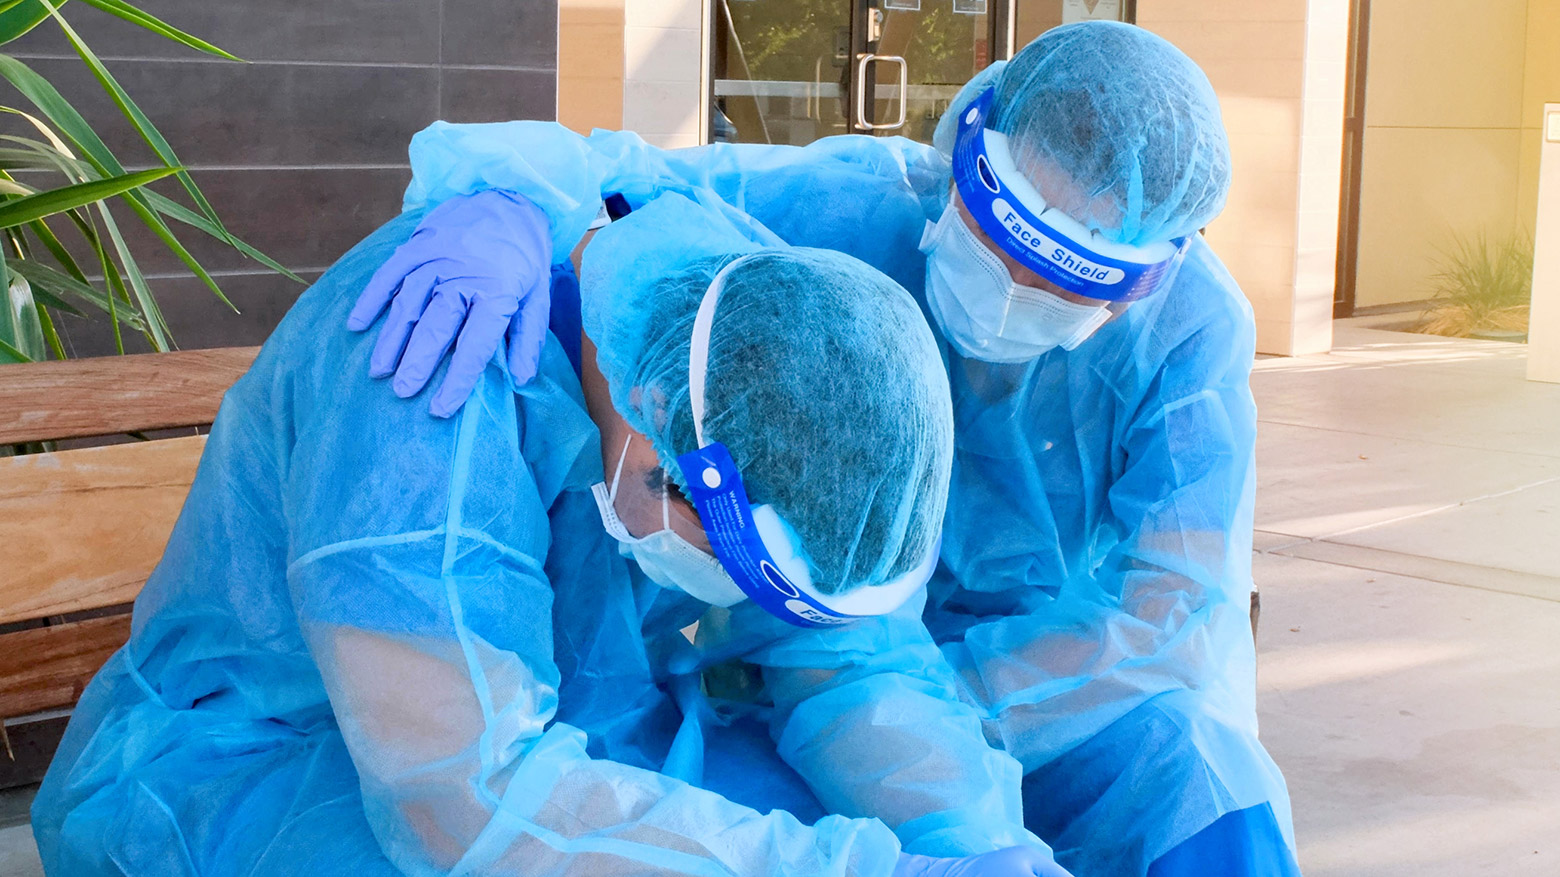 Two doctors in PPE on a bench. One is slumped over with his head down, while the other comforts him.